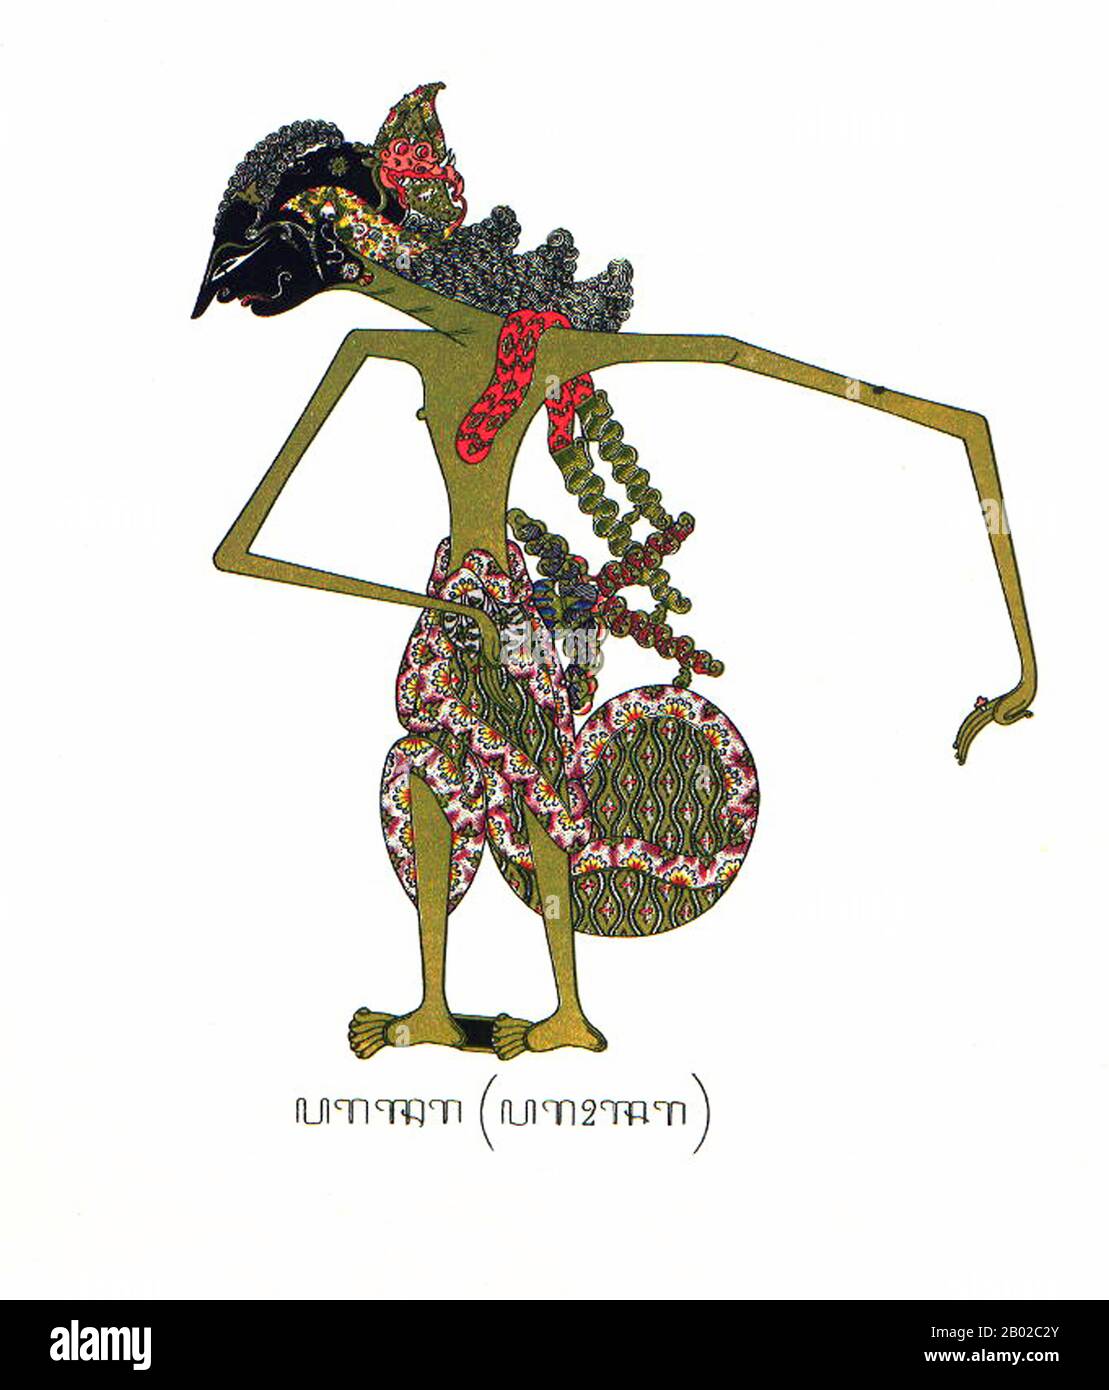 Wayang is a Javanese word for particular kinds of theatre (literally 'shadow'). When the term is used to refer to kinds of puppet theatre, sometimes the puppet itself is referred to as wayang. Performances of shadow puppet theatre are accompanied by gamelan in Java.  UNESCO designated Wayang Kulit, a shadow puppet theatre and the best known of the Indonesian wayang, as a Masterpiece of Oral and Intangible Heritage of Humanity on 7 November 2003. Stock Photo